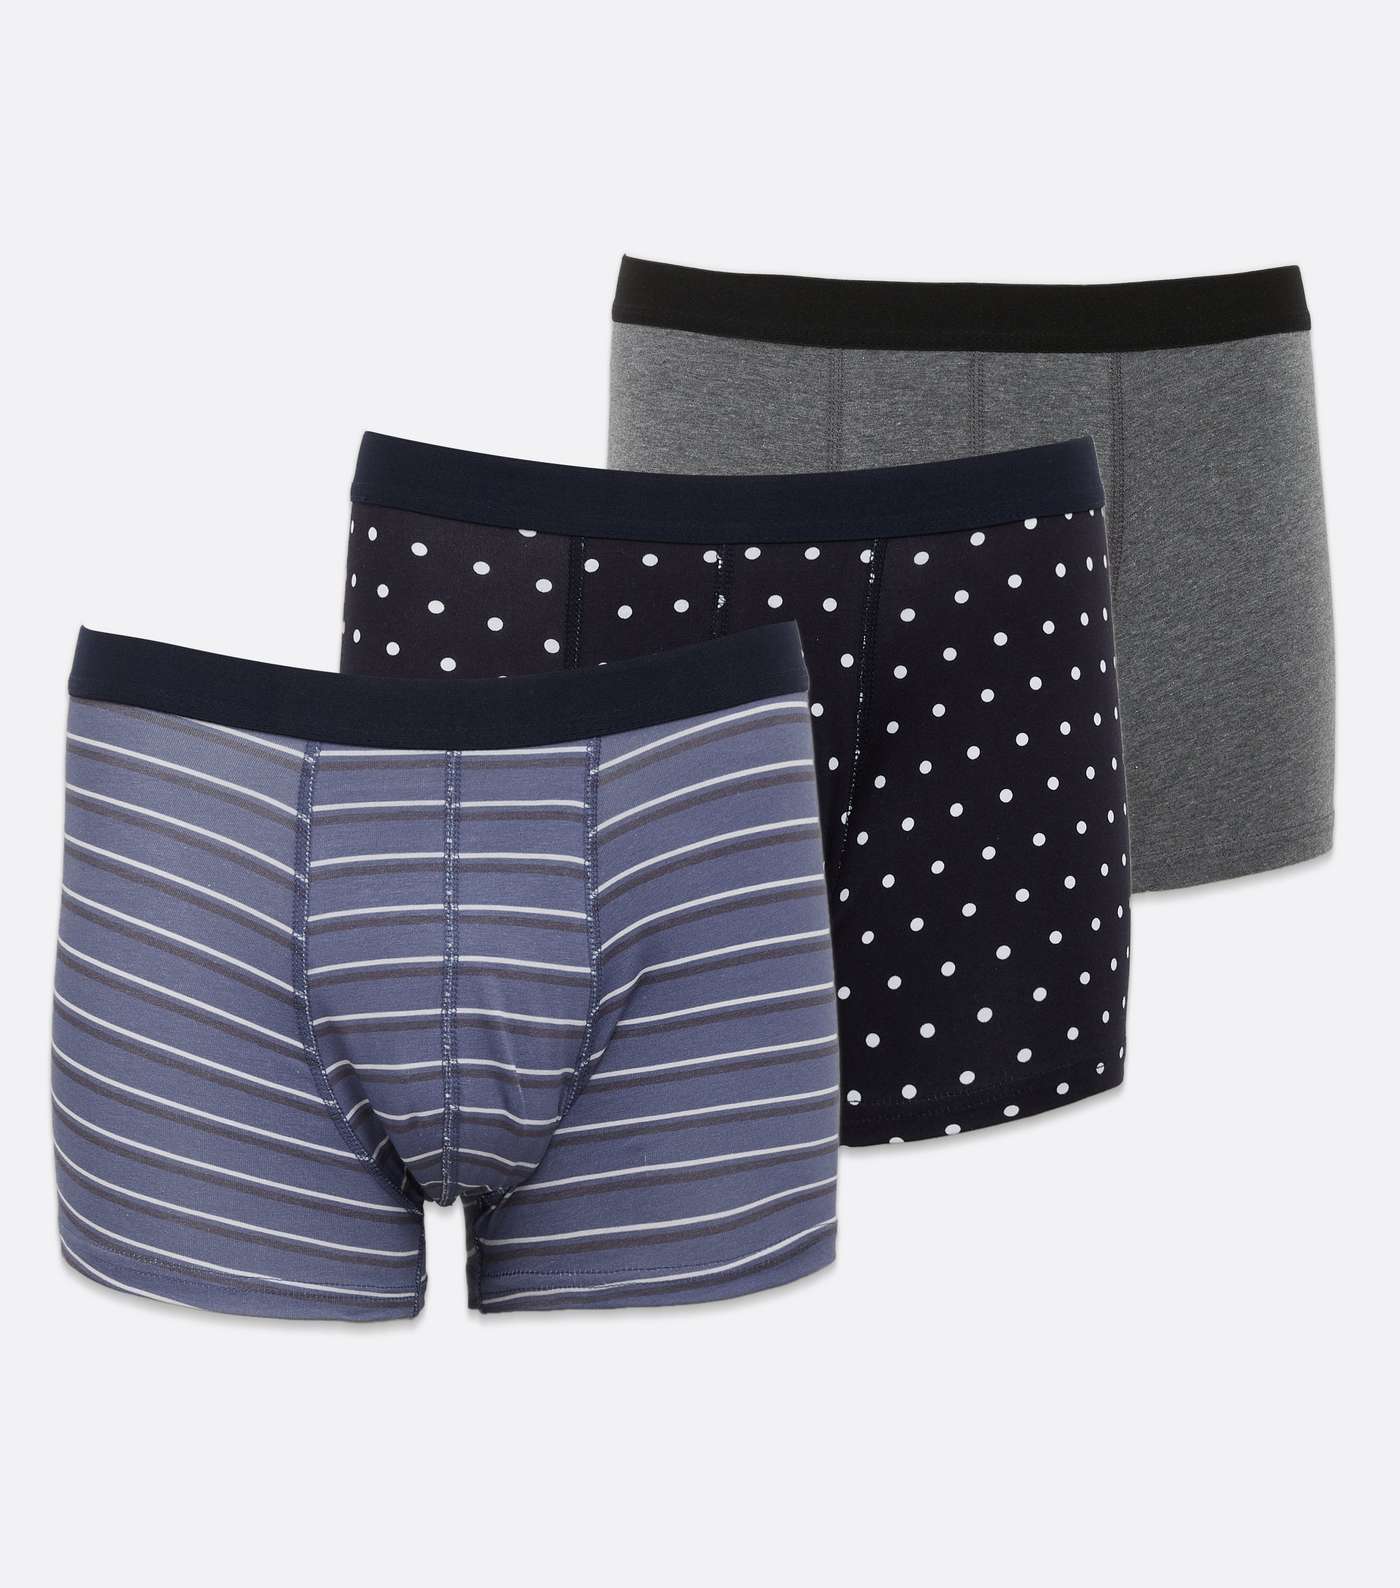 3 Pack Navy Stripe Black Spot and Grey Boxers